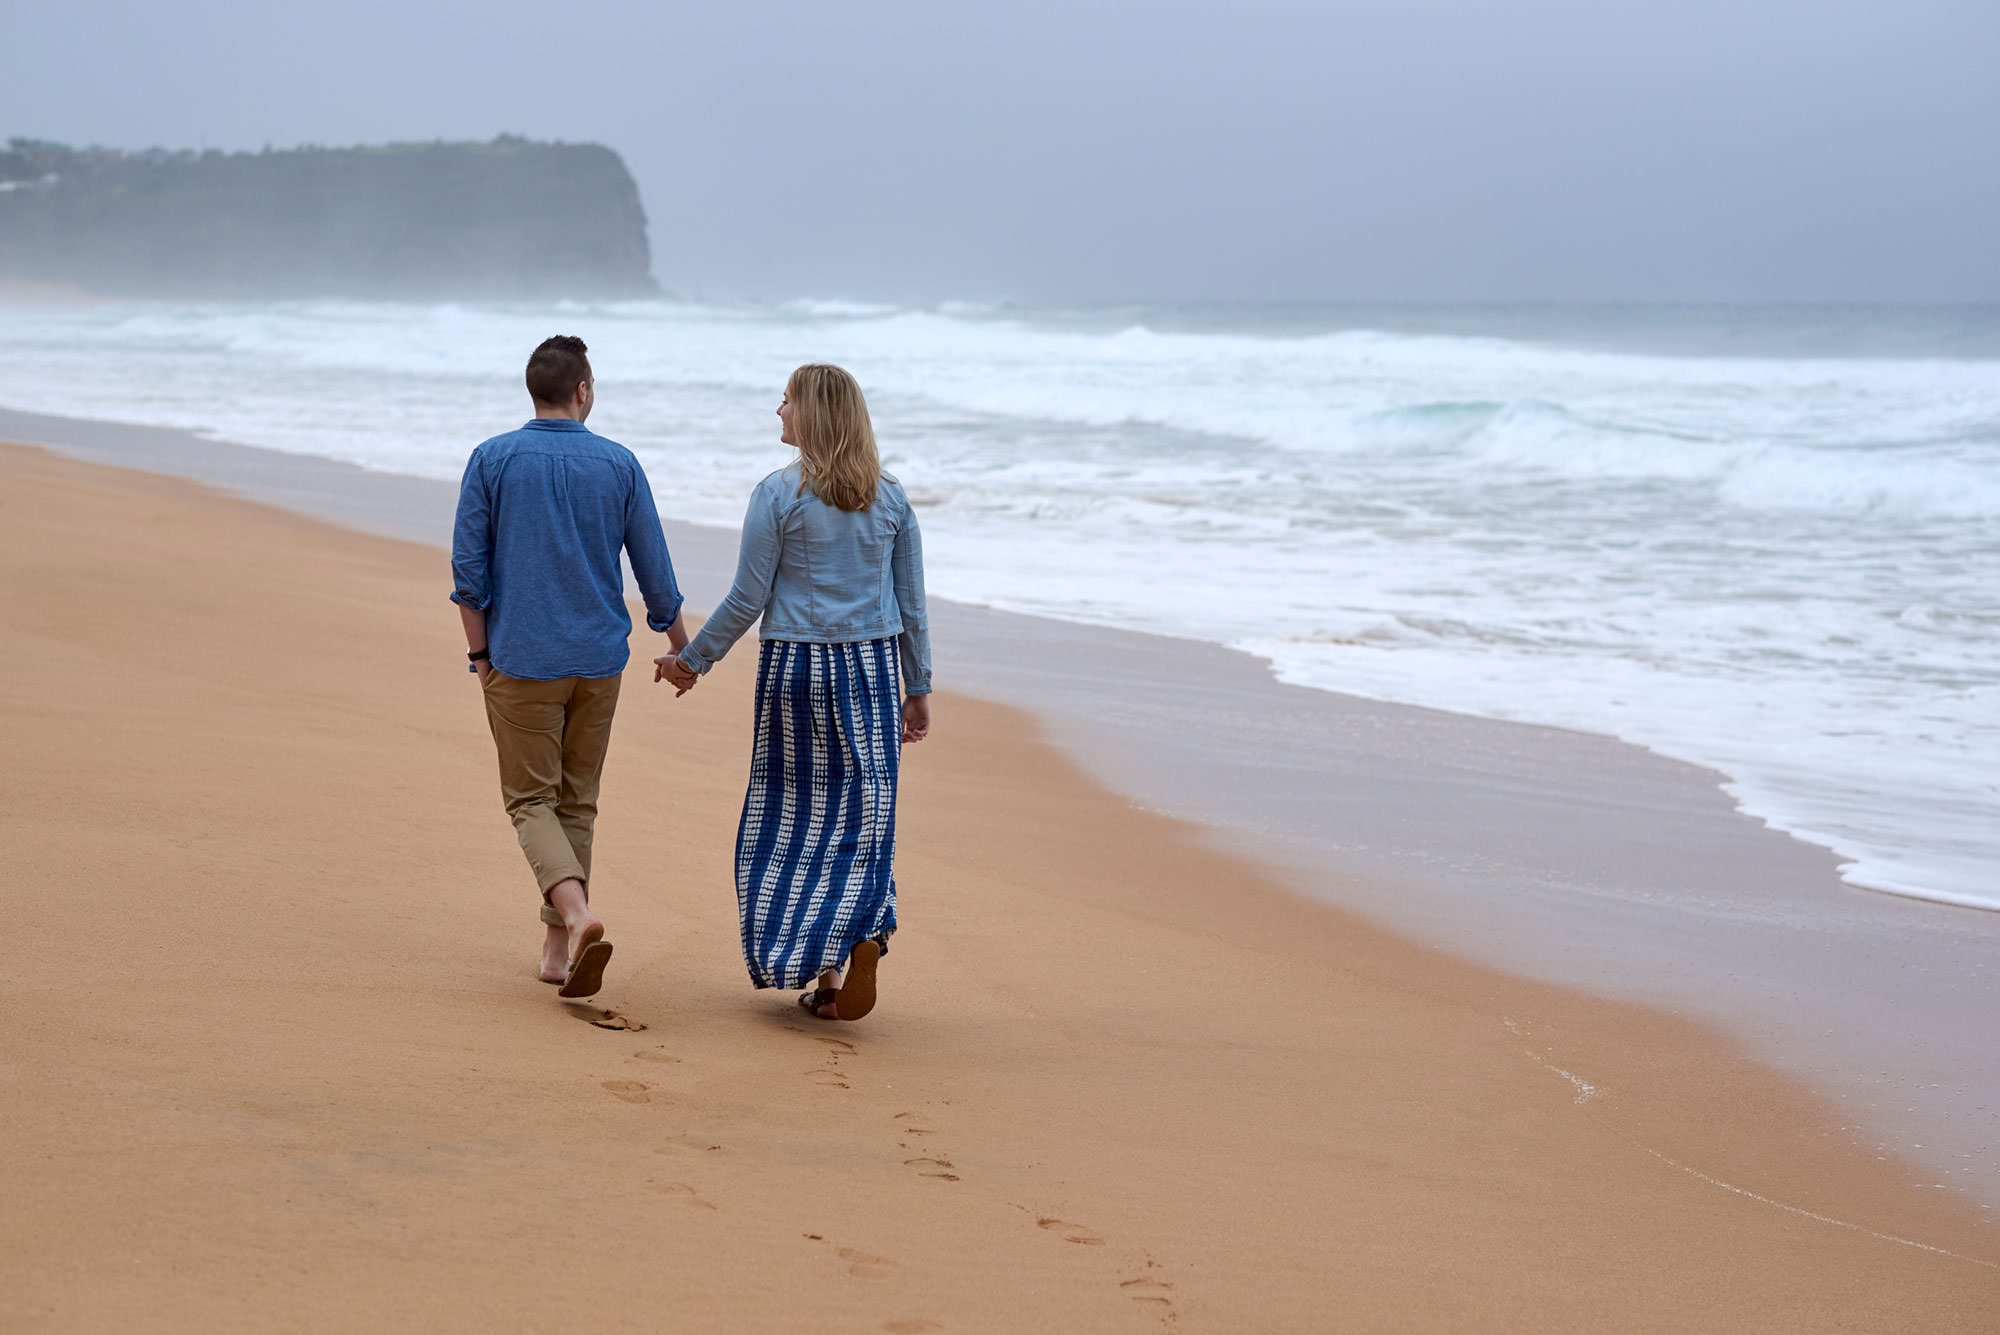 Walking on the beach at Mona Vale